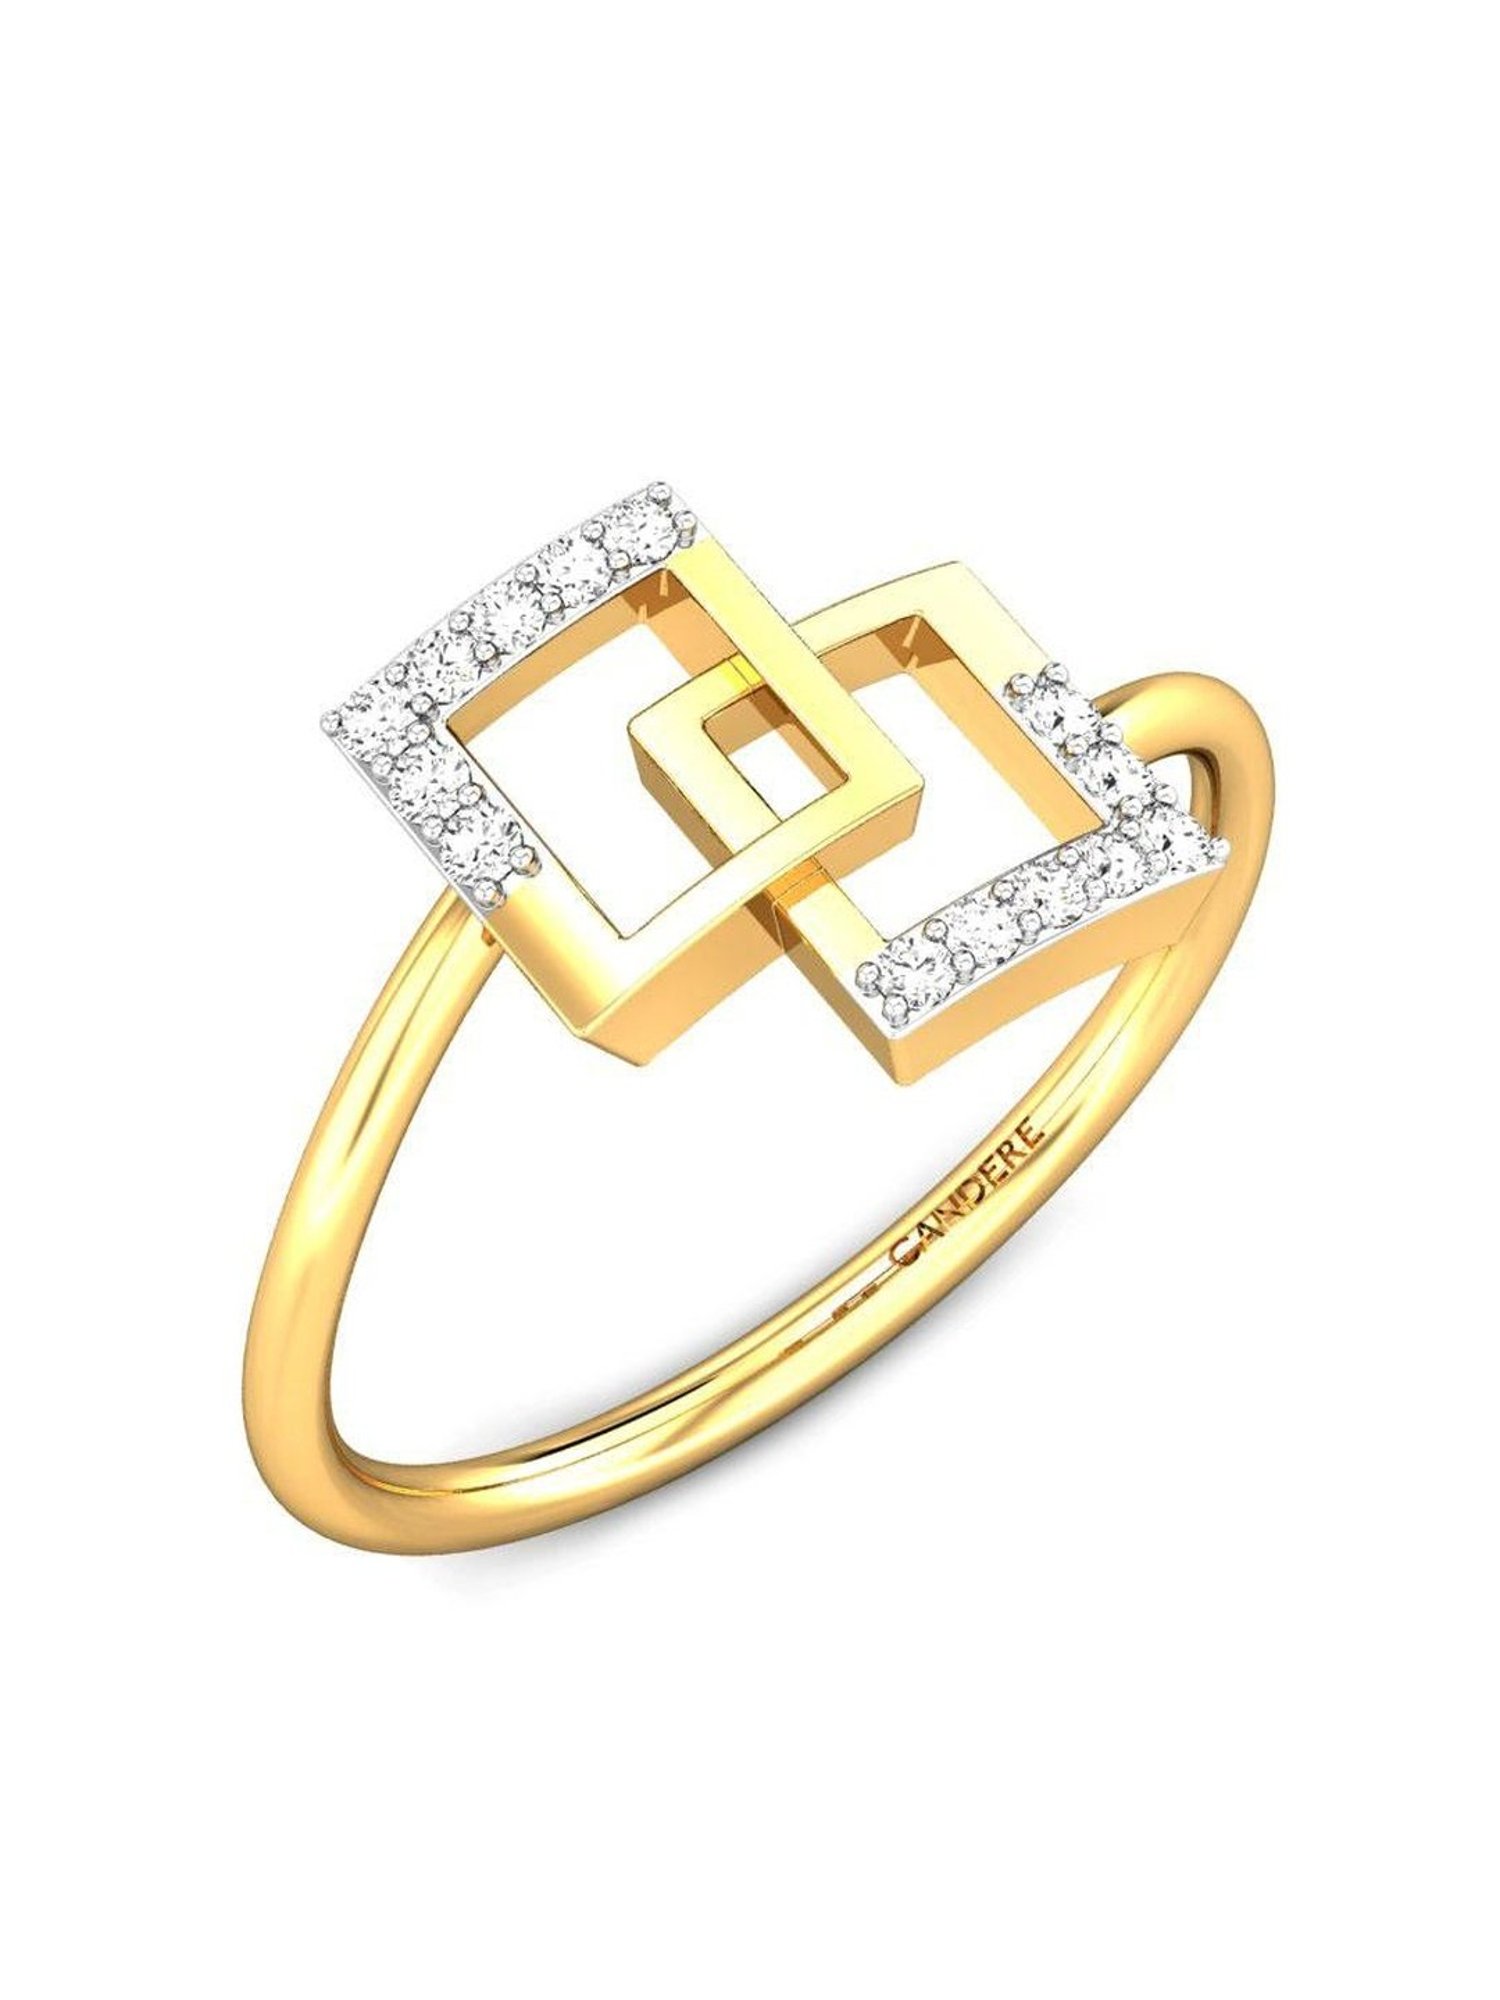 Buy Candere by Kalyan Jewellers 14k Yellow Gold Diamond Ring Online At Best  Price @ Tata CLiQ